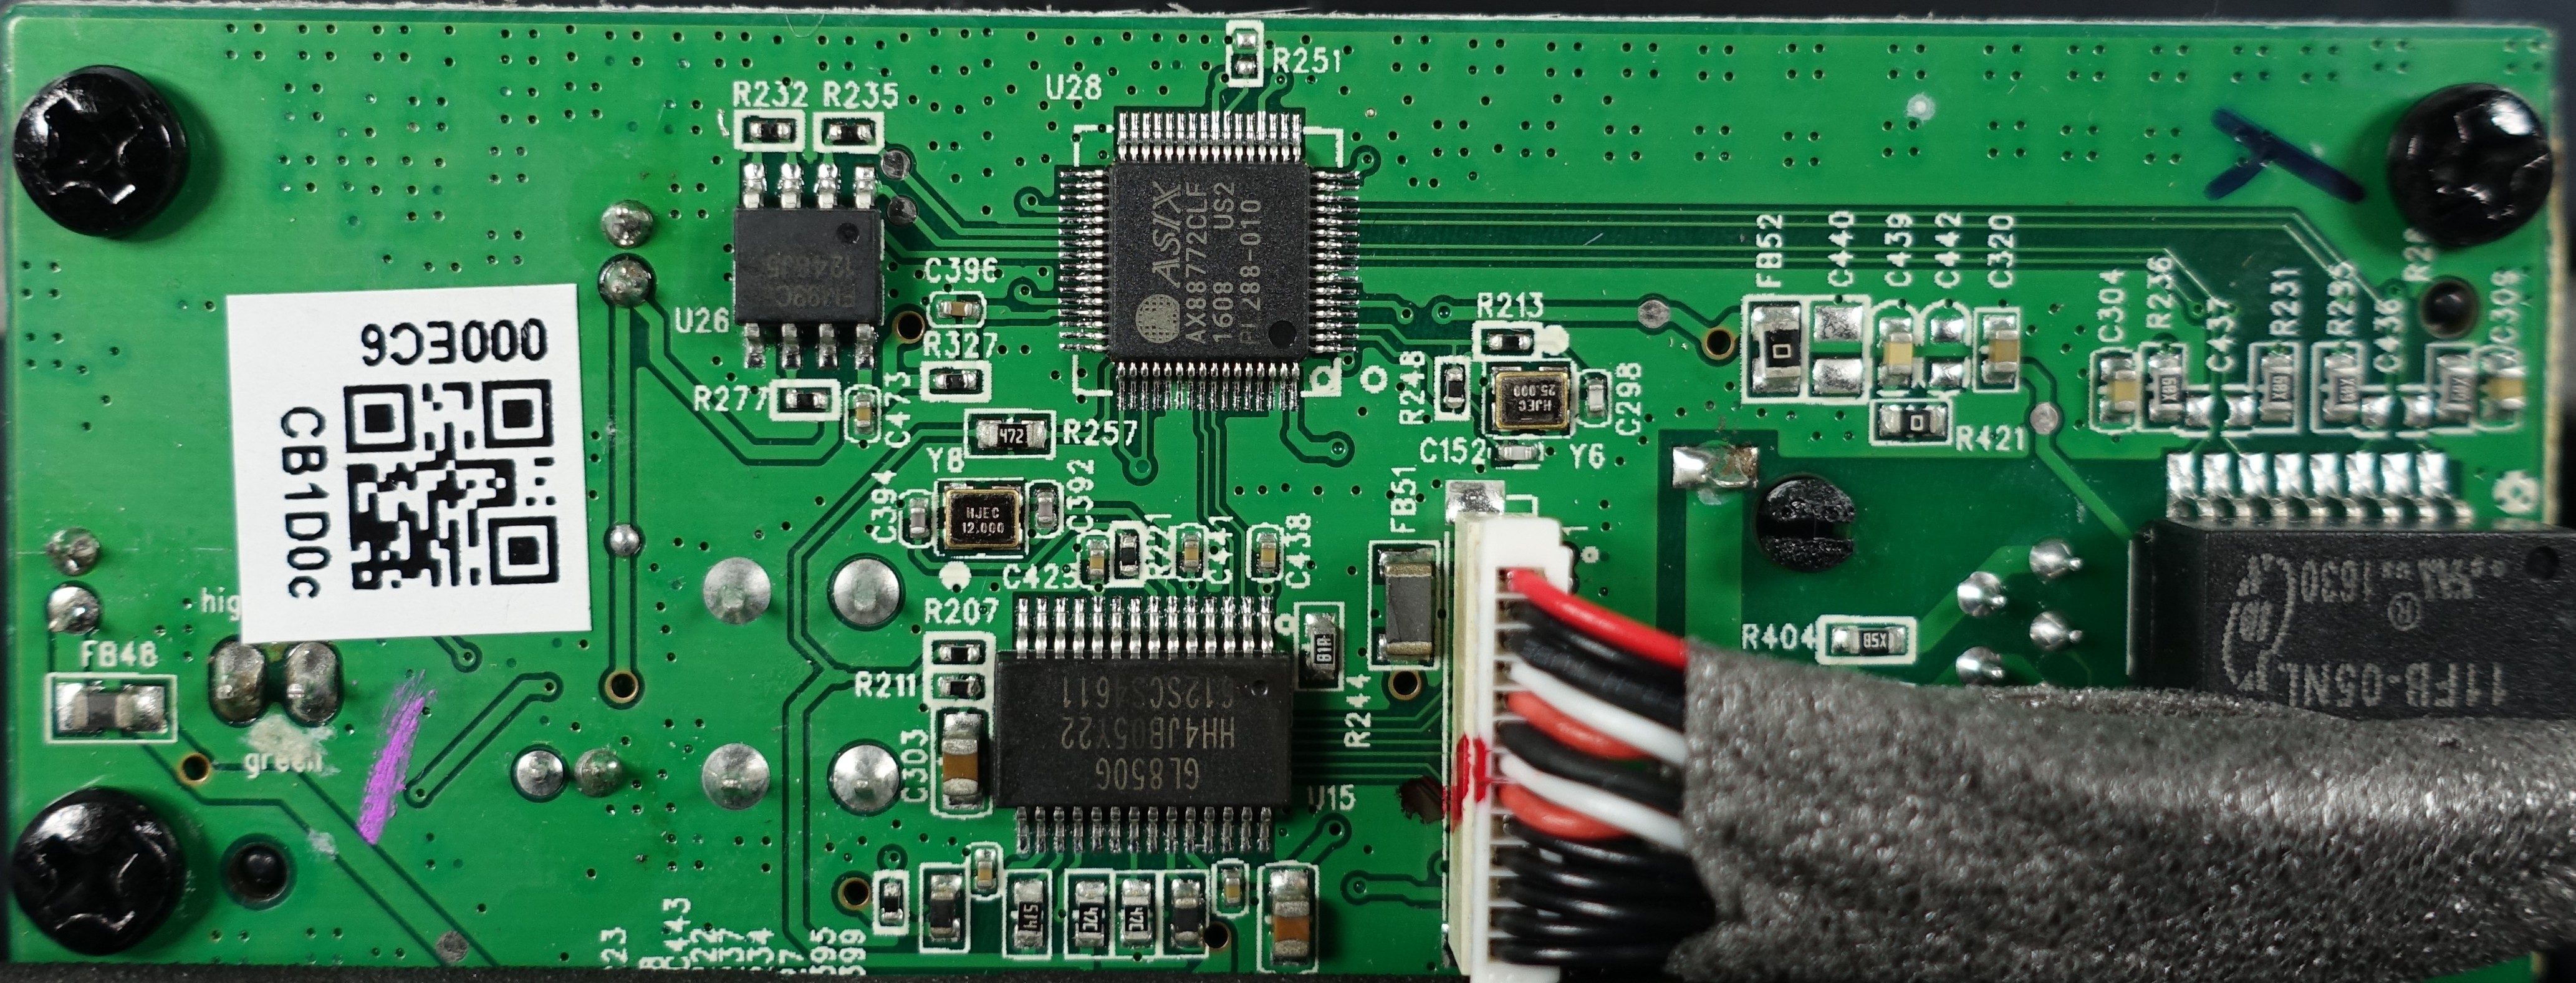 Ethernet board and USB input